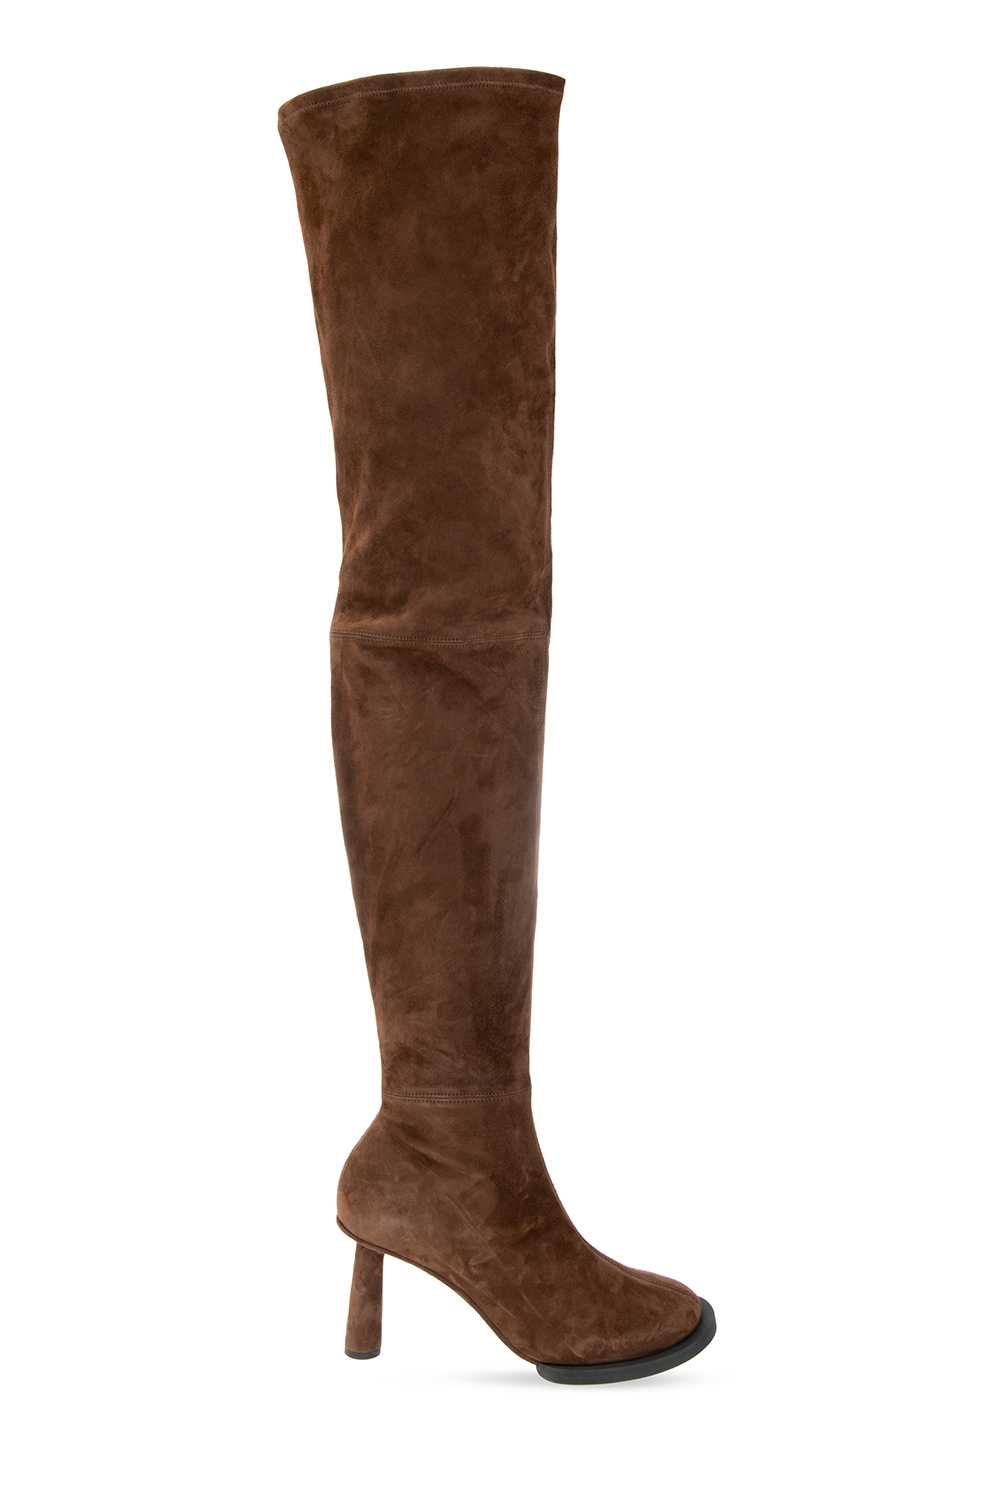 Jacquemus ‘Les’ over-the-knee boots